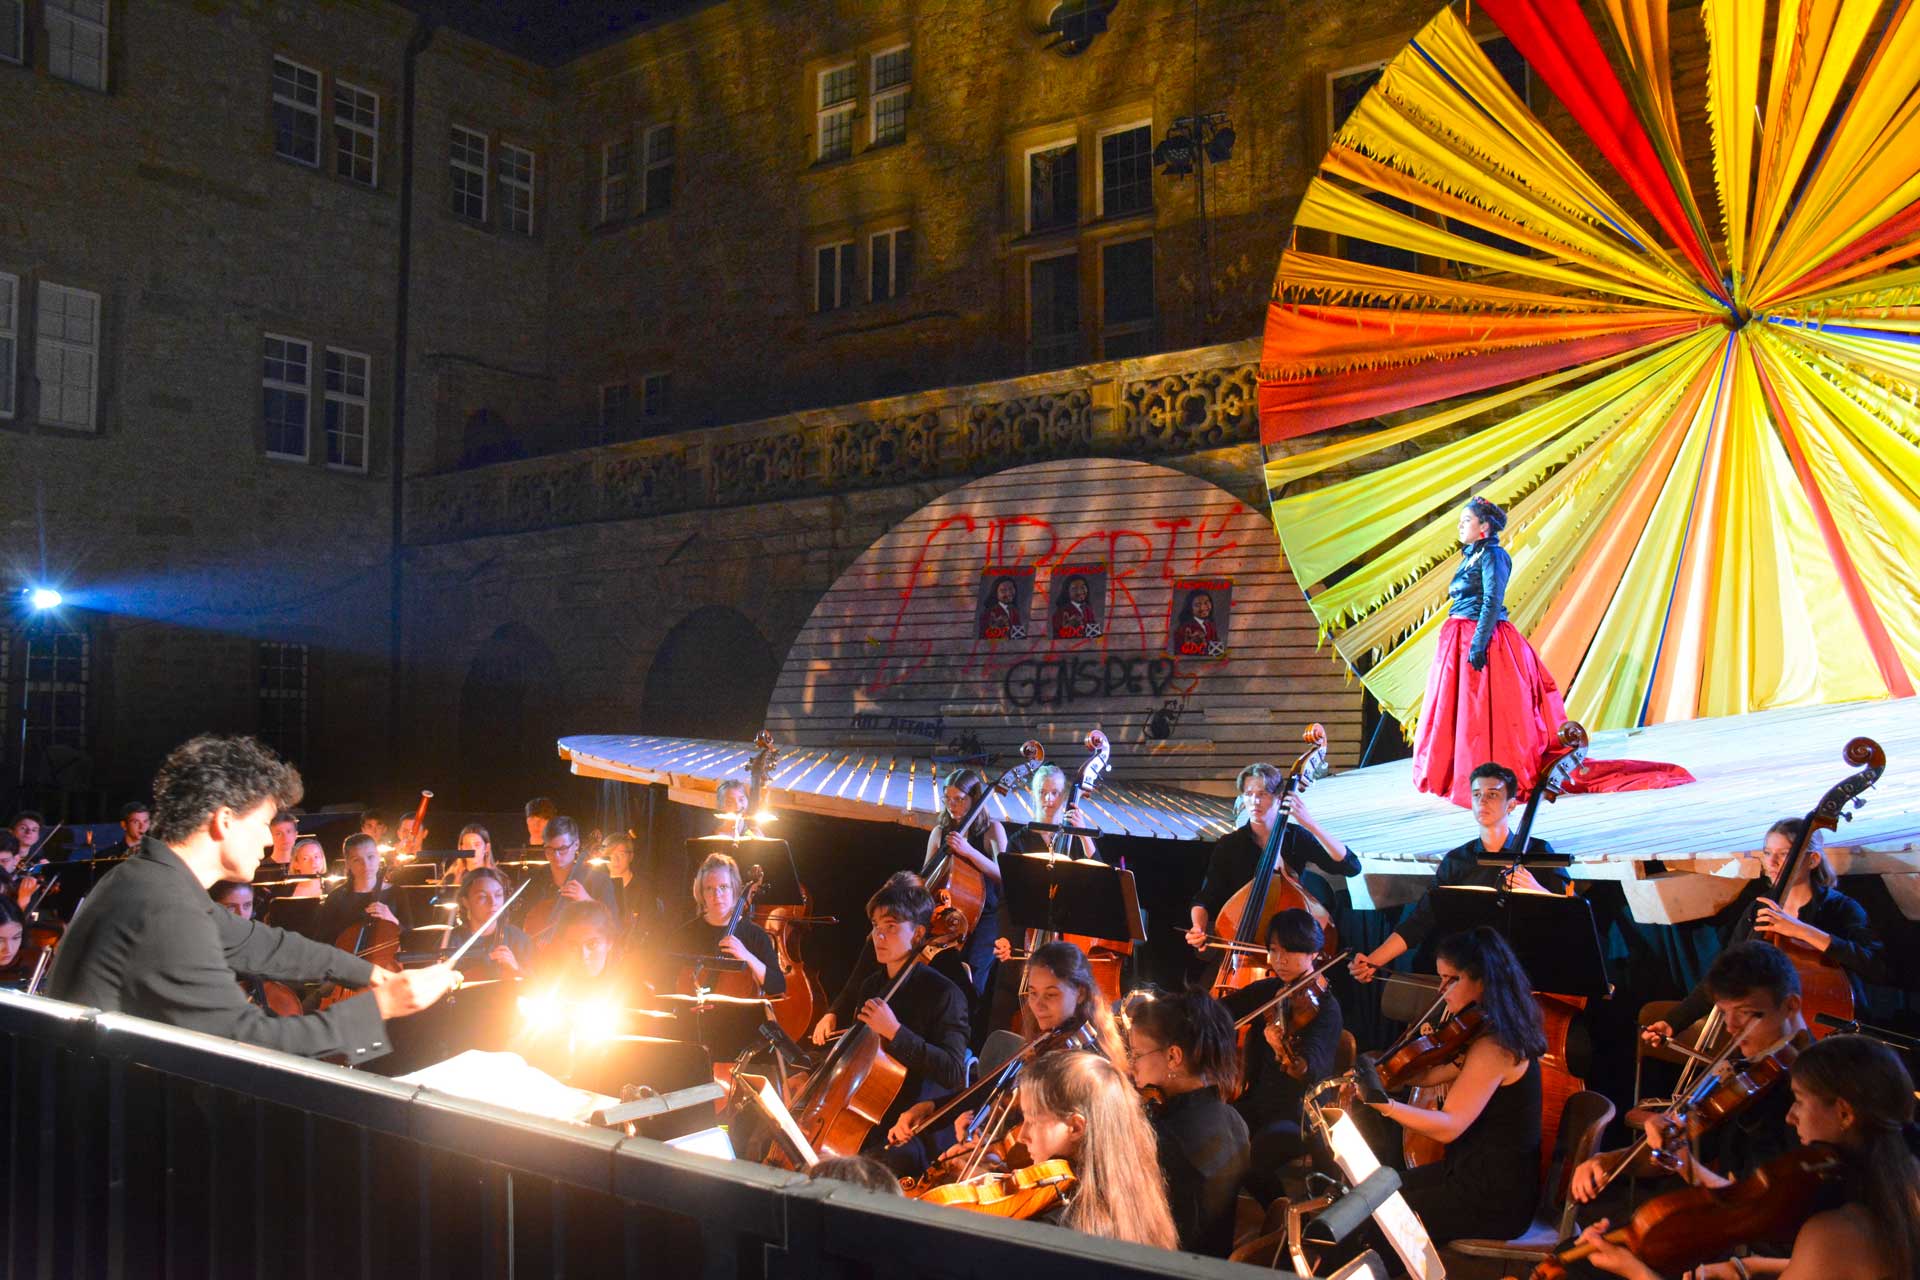 YOUNG OPERA SCHLOSS WEIKERSHEIM To mark the finale of the International Opera Academy of Jeunesses Musicales 2021, the courtyard of Schloss Weikersheim castle was converted into an opera house with a performance of “Carmen”. The lead role was played by mezzo-soprano Gabriela Goméz from Chile.